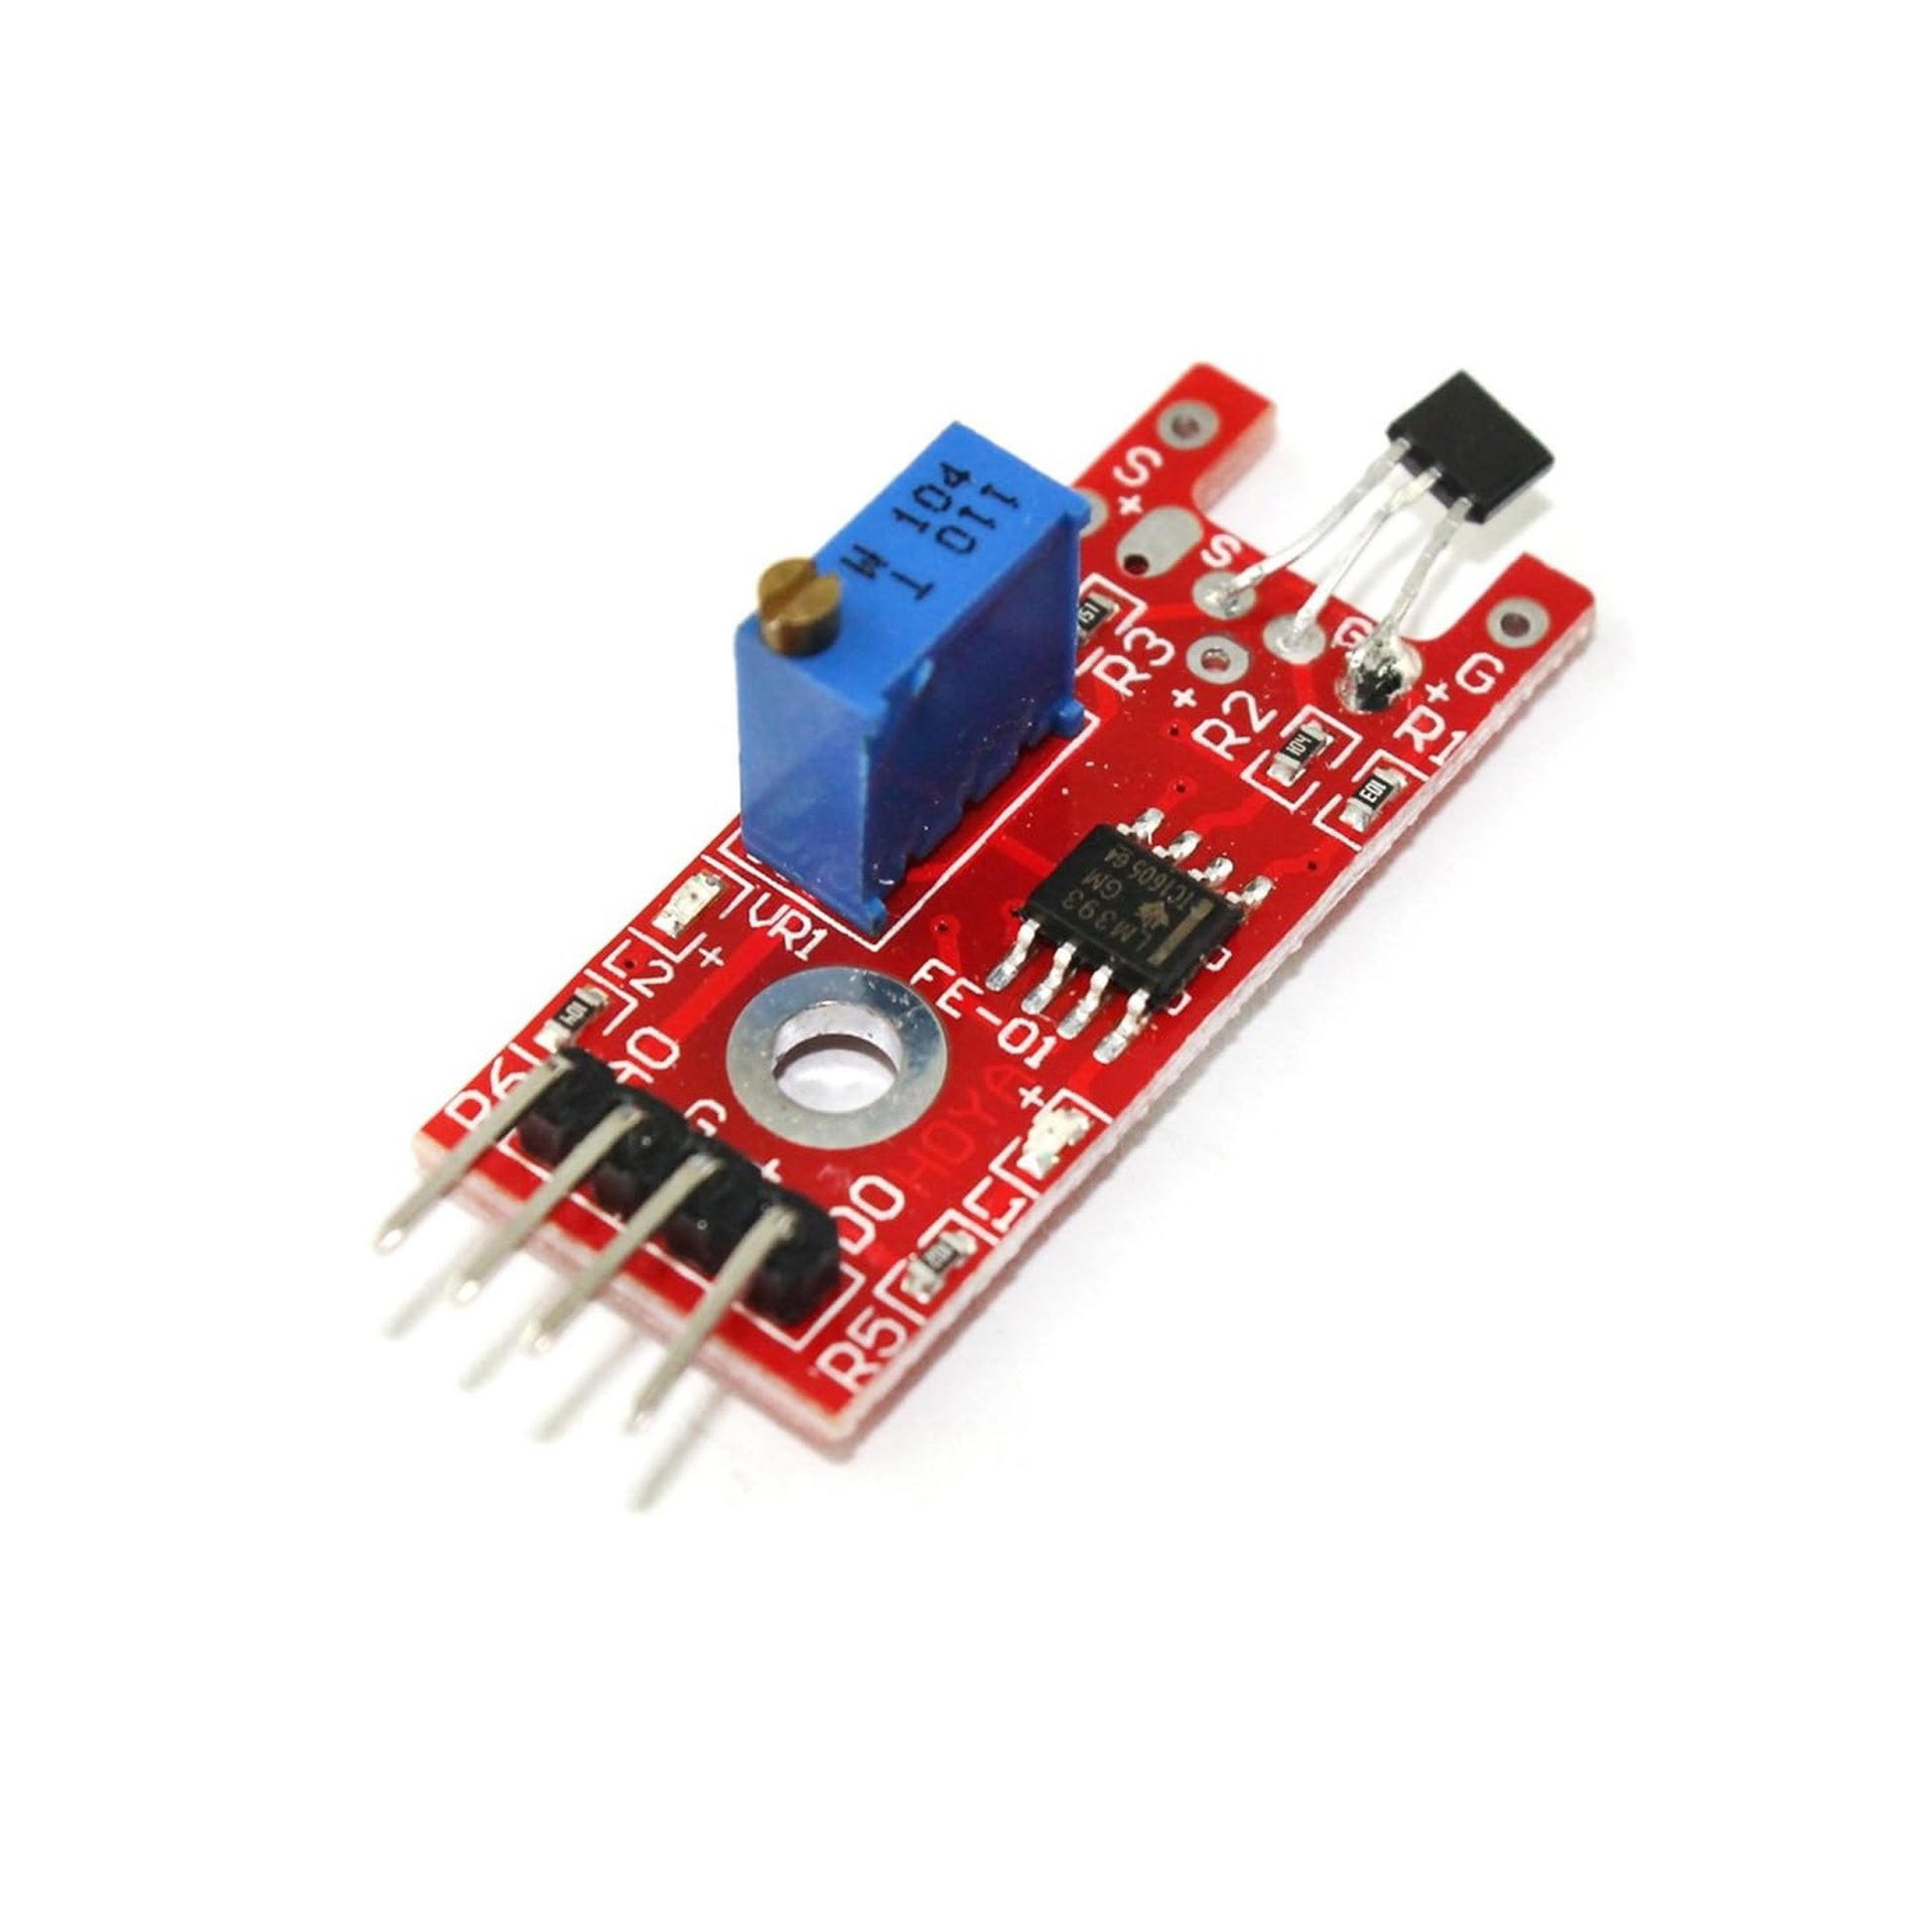 Linear Magnetic Hall Effect Sensor Module Hall Effect Switch Speed Counting Sensor Module compatible with Arduino, Raspberry Pi, ESP8266 Boards - AB008 - REES52